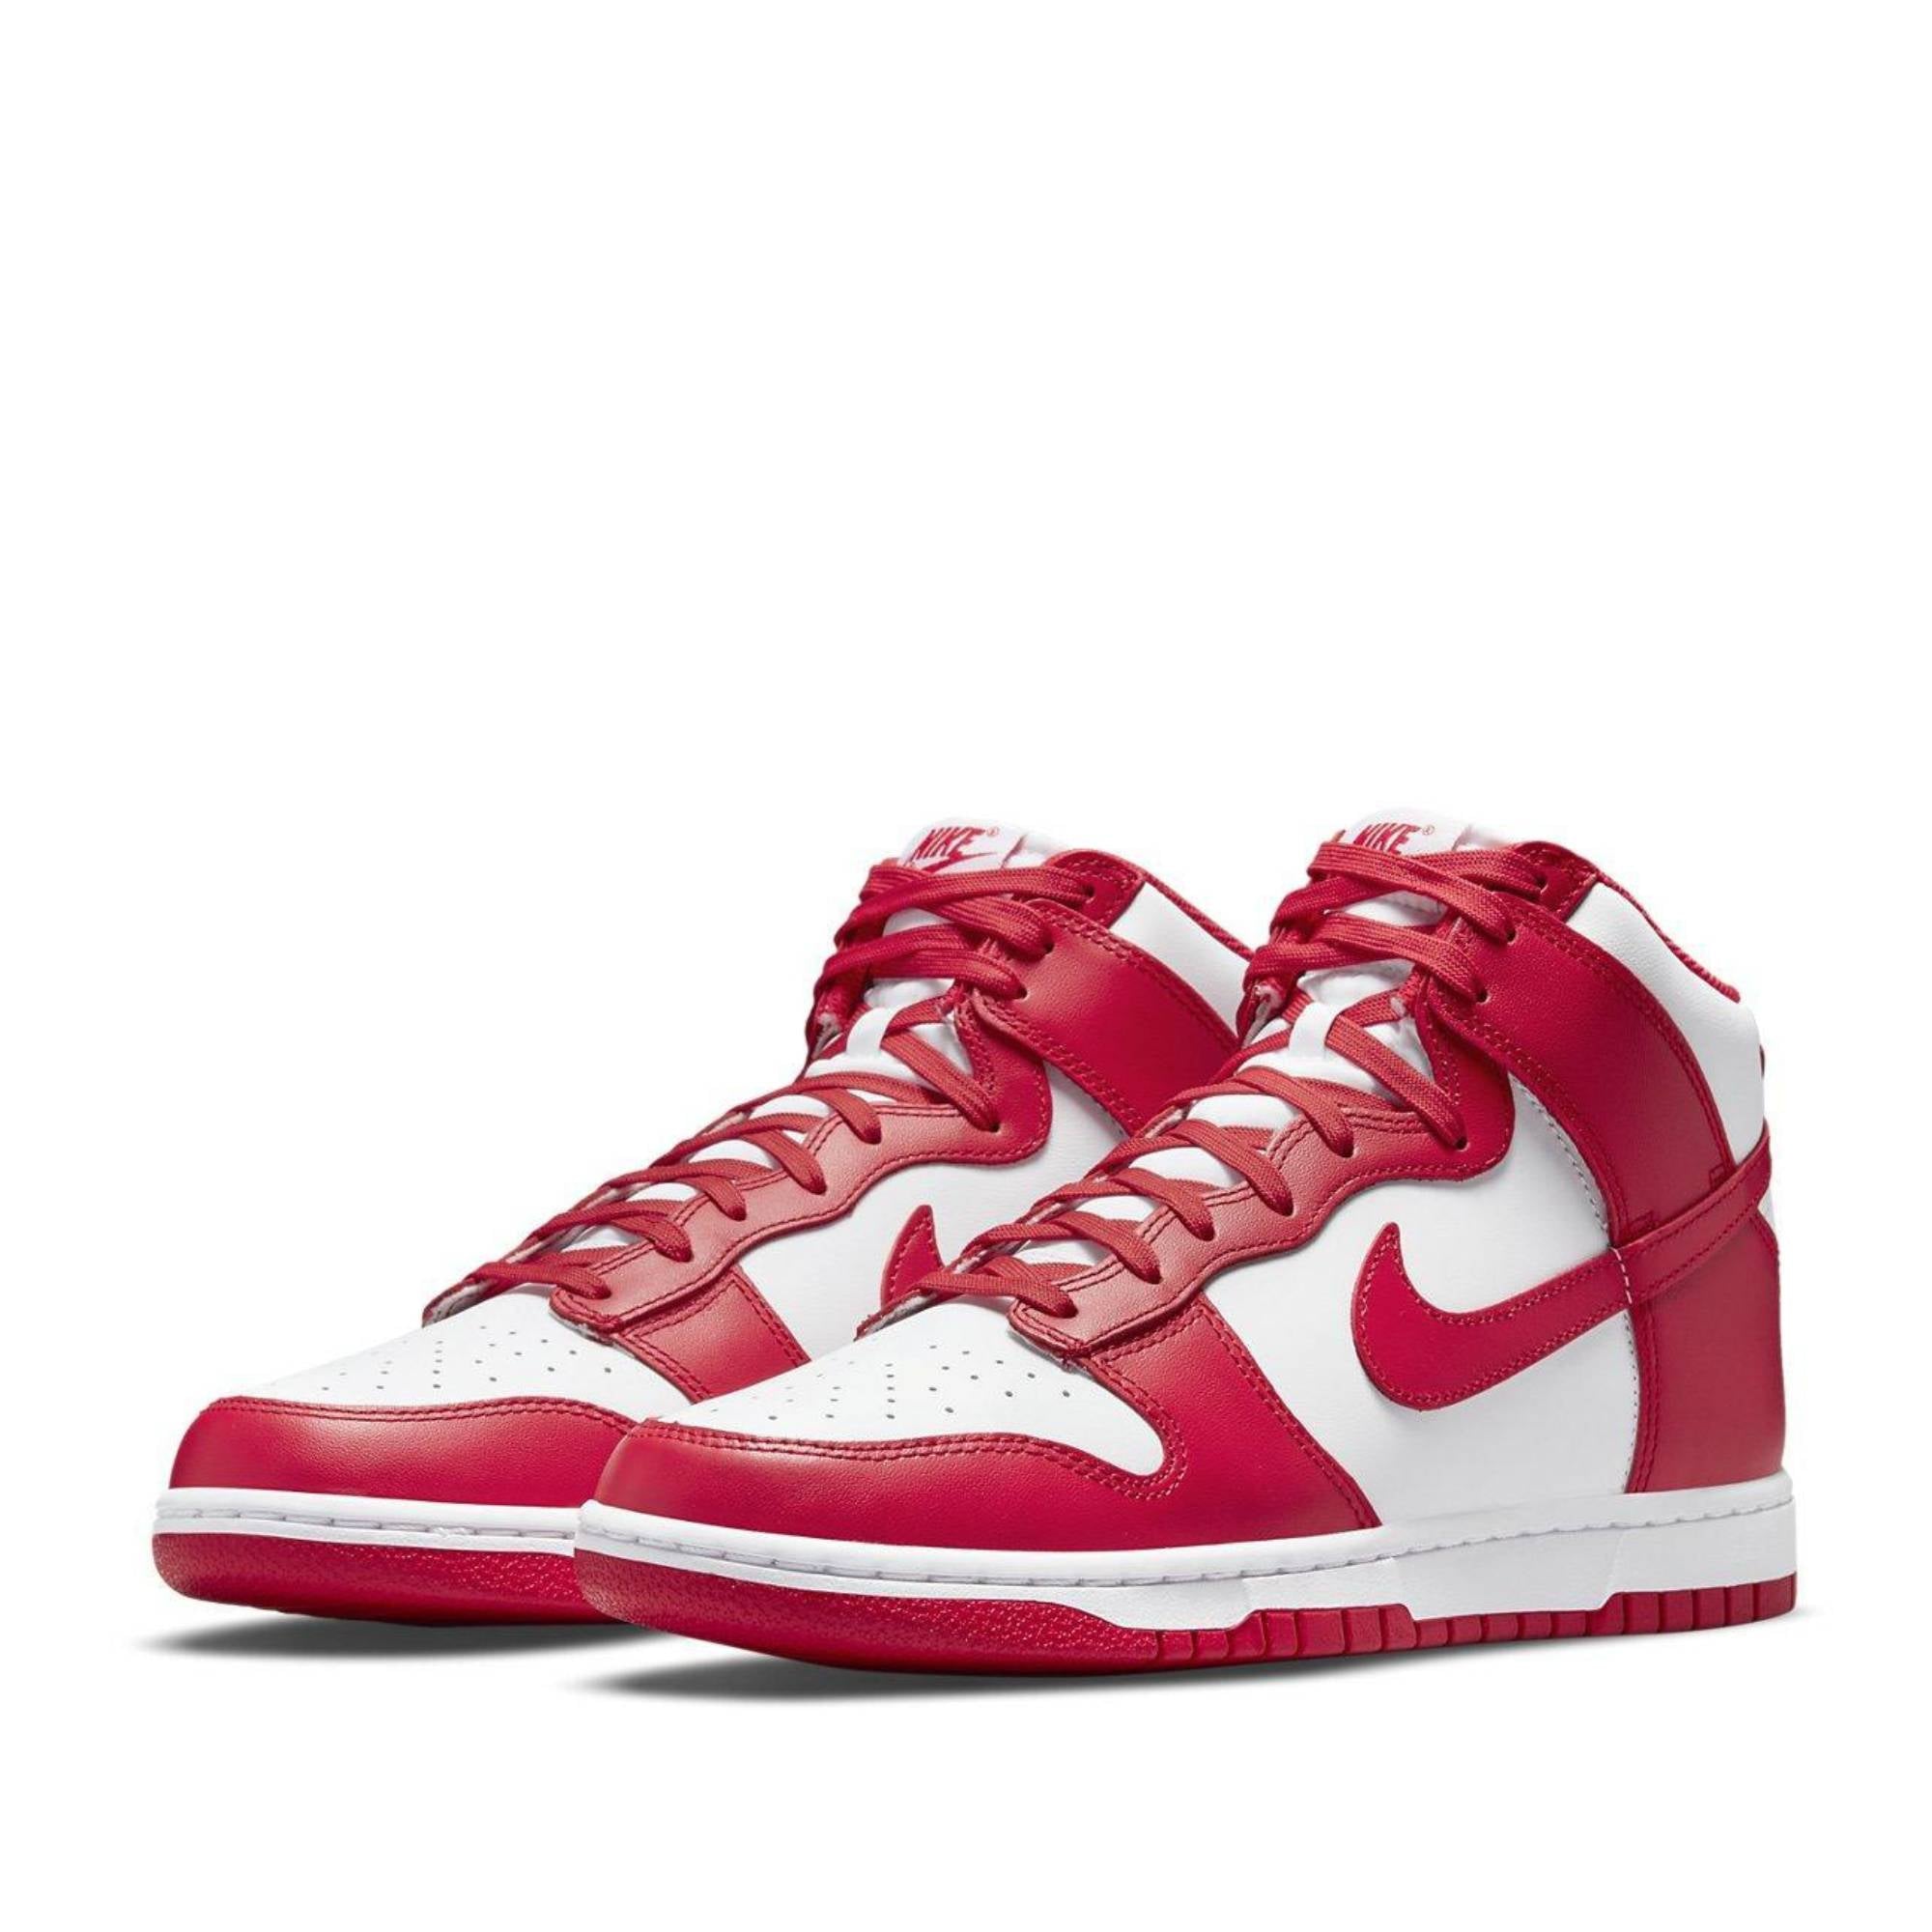 Nike Dunk High Youth ’Championship Red’ Us 4Y / W 5.5 Sneakers